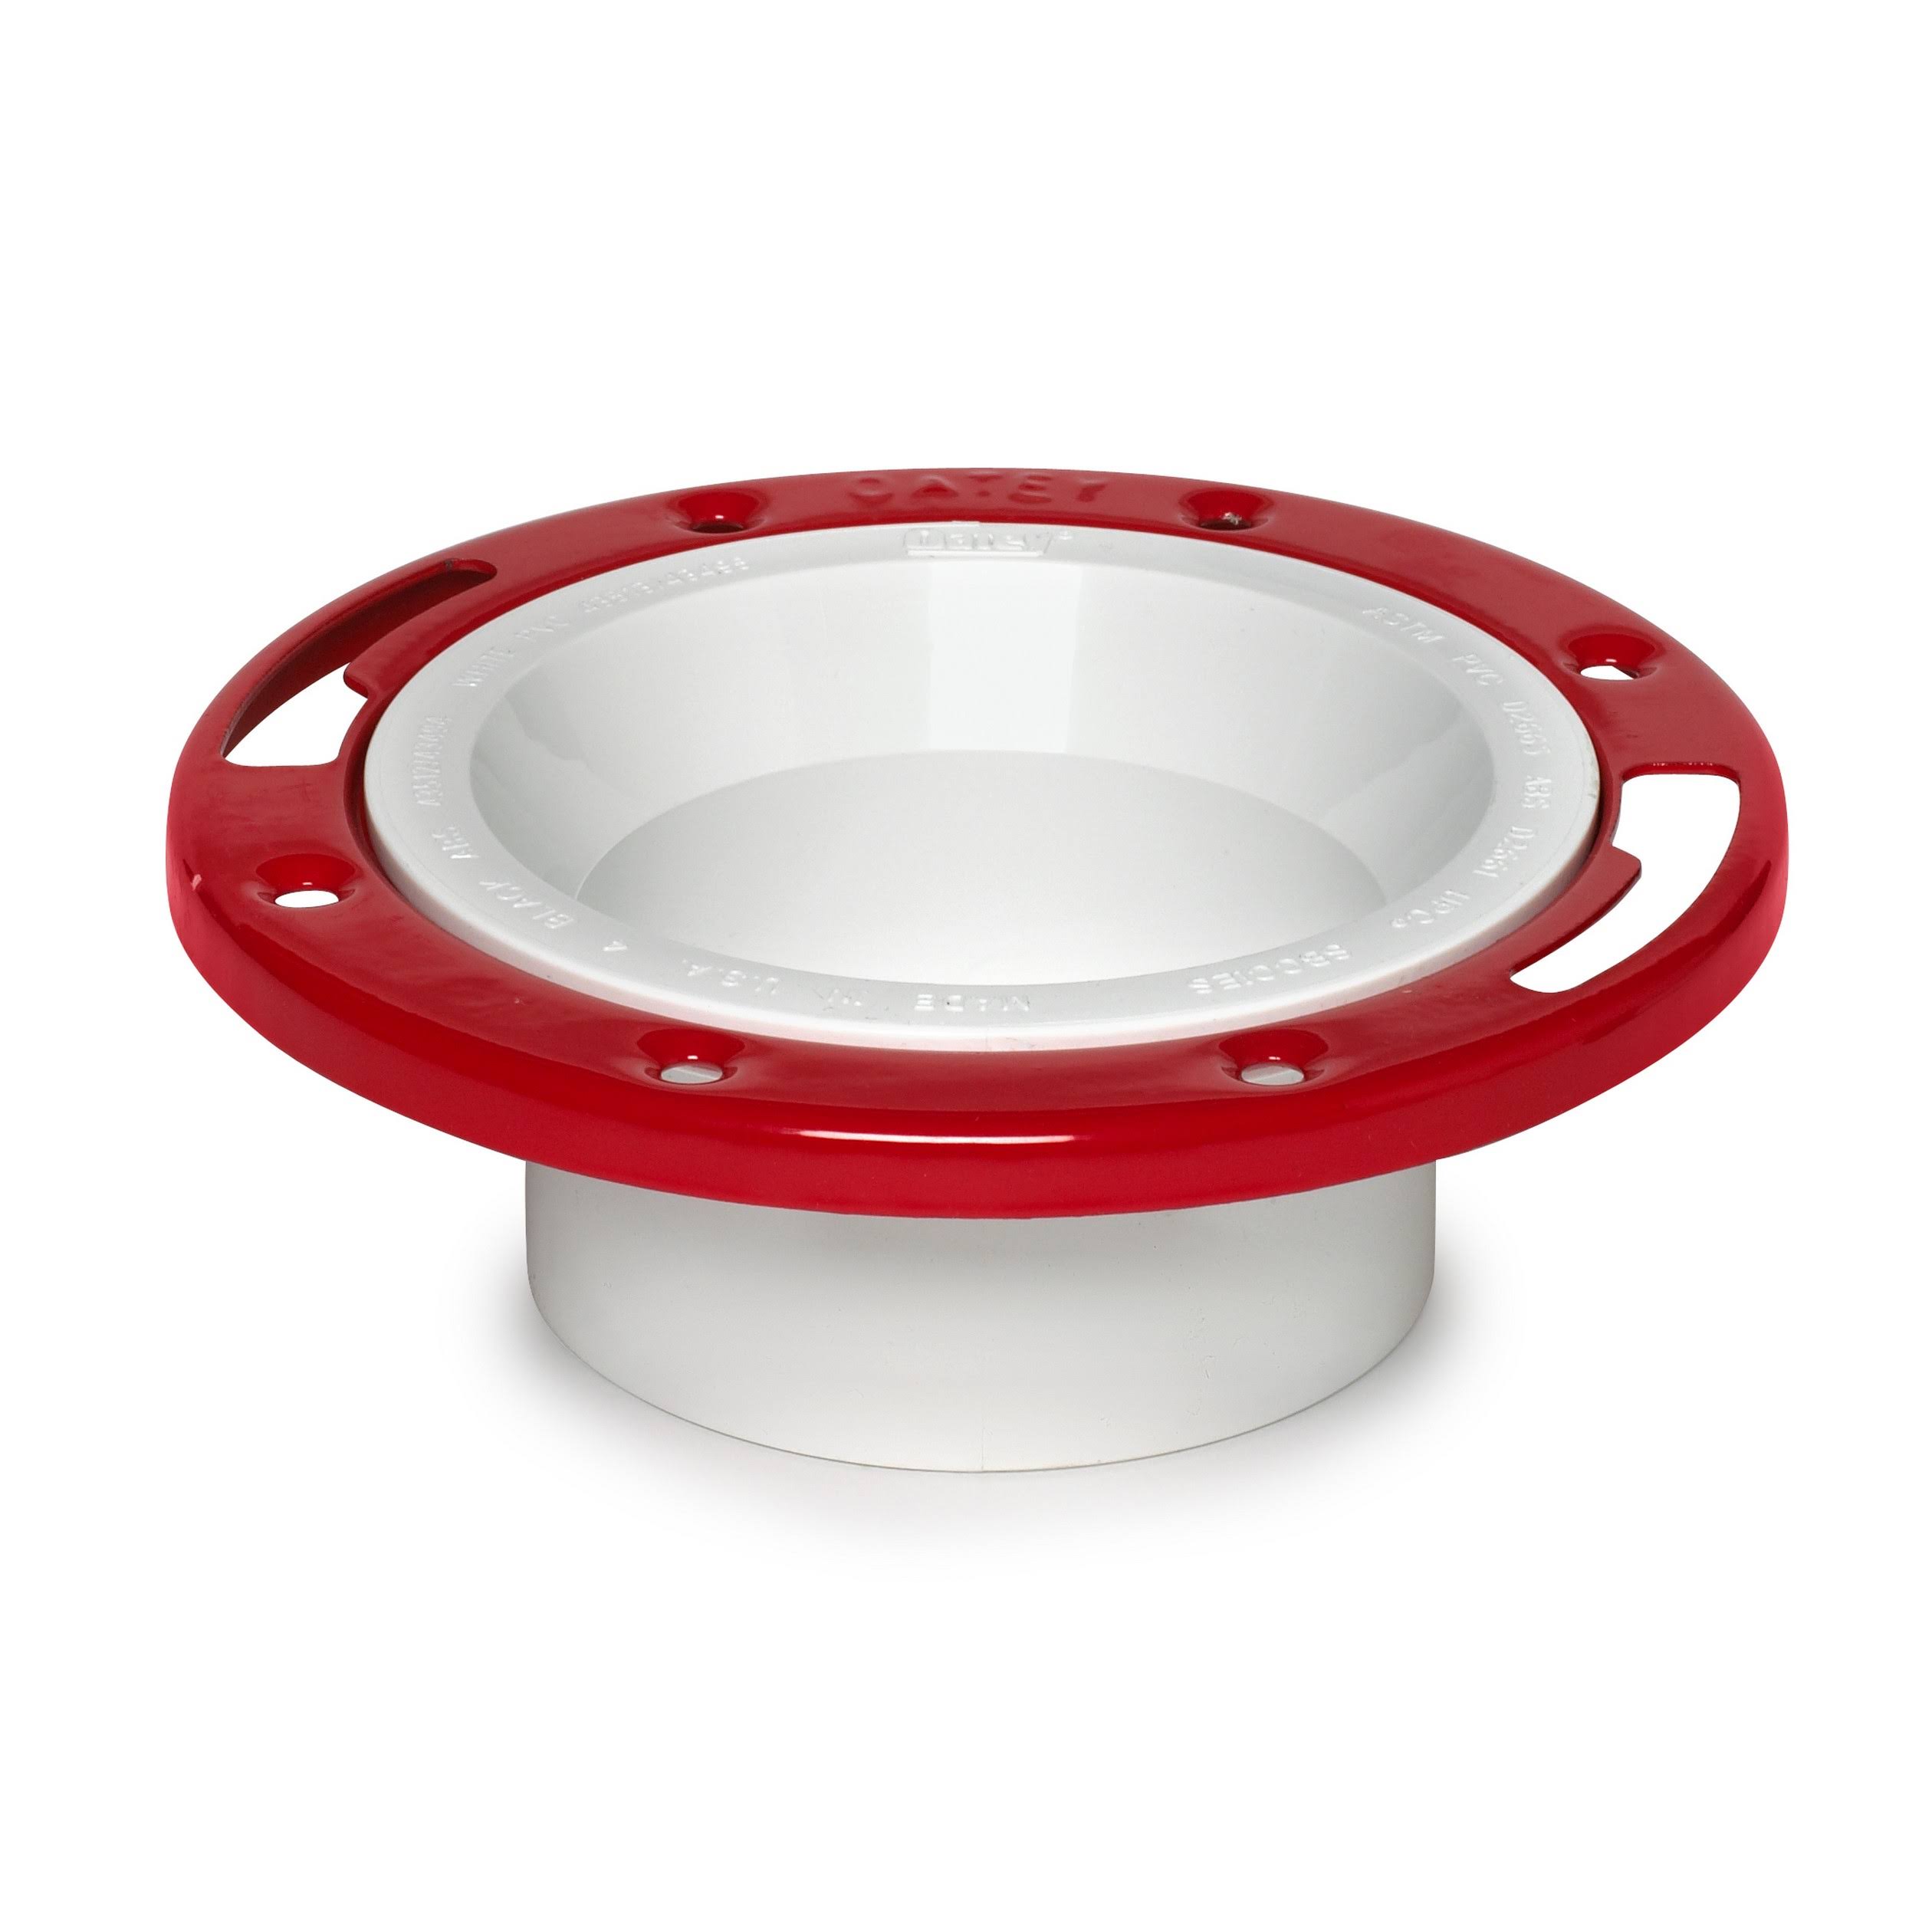 Oatey 43513 PVC Flange - with Metal Ring, 4"